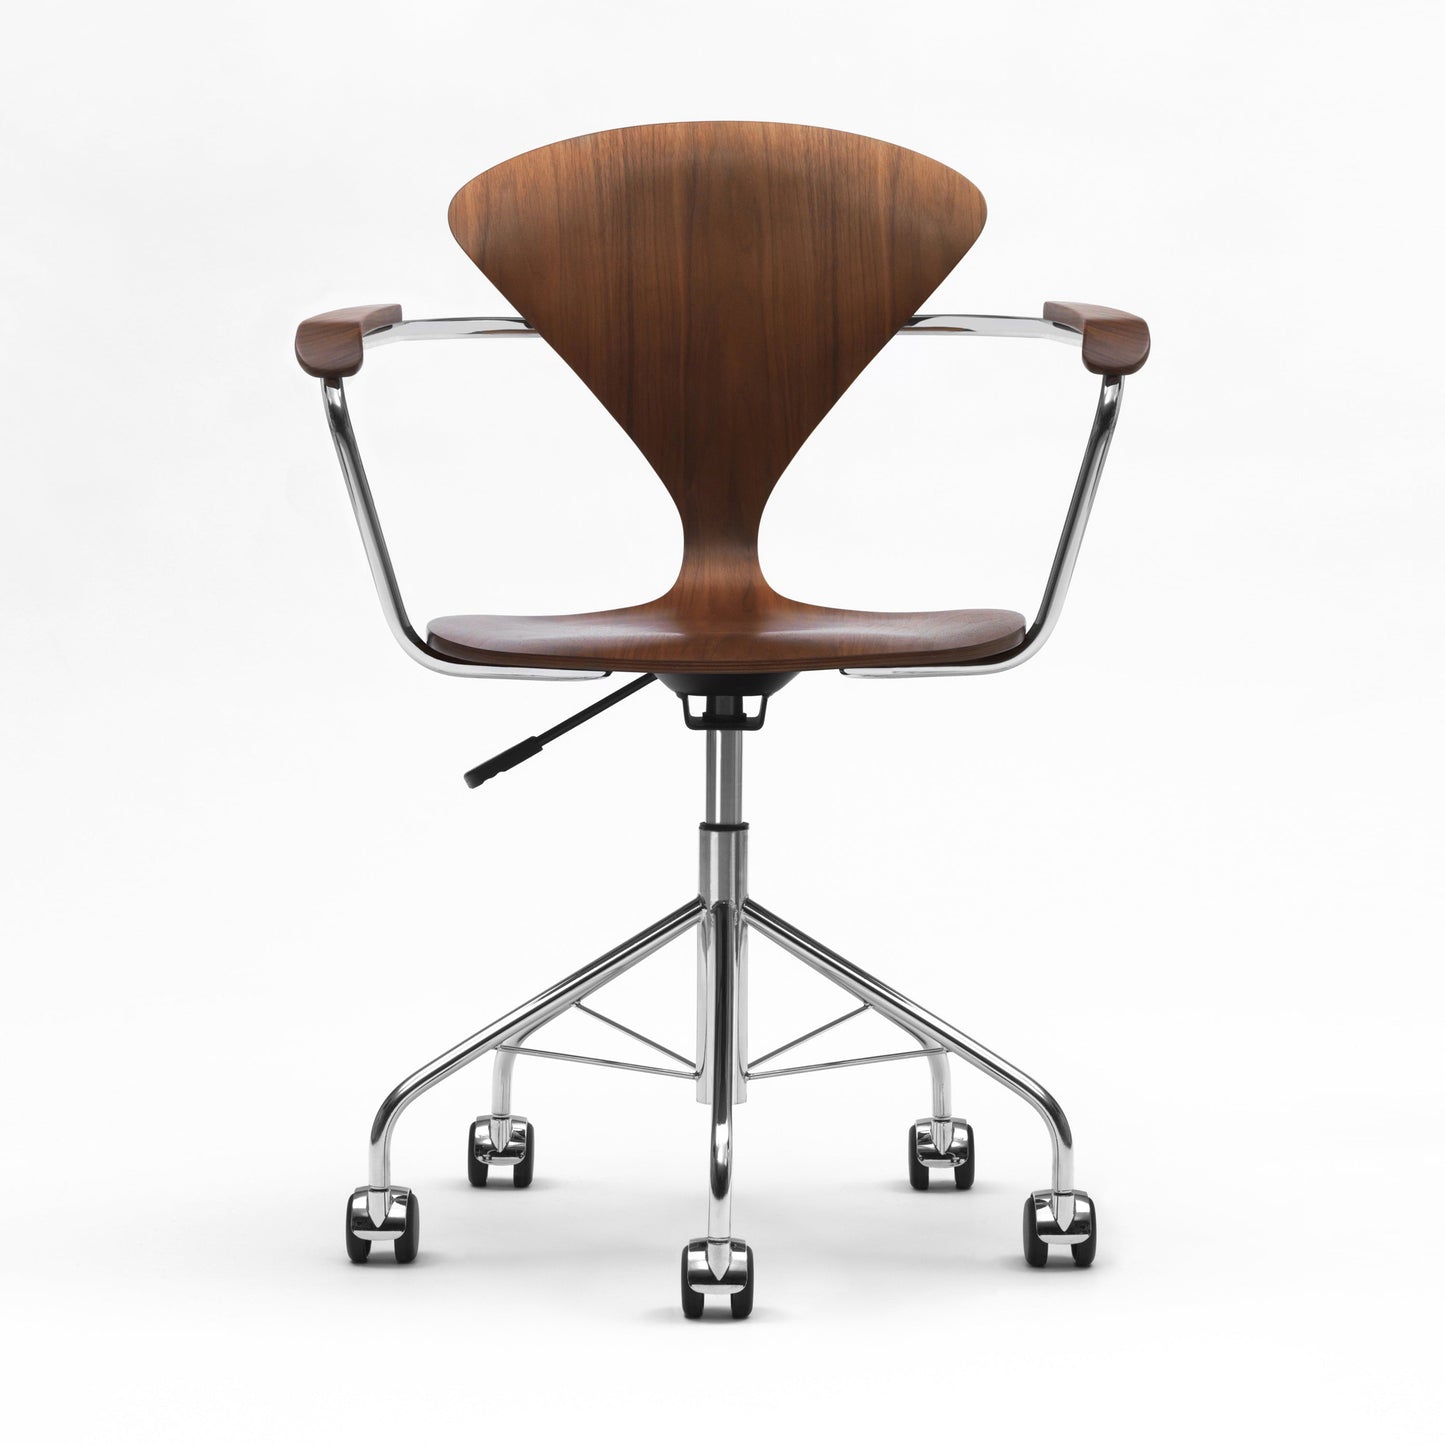 Task Office Chair with Arms